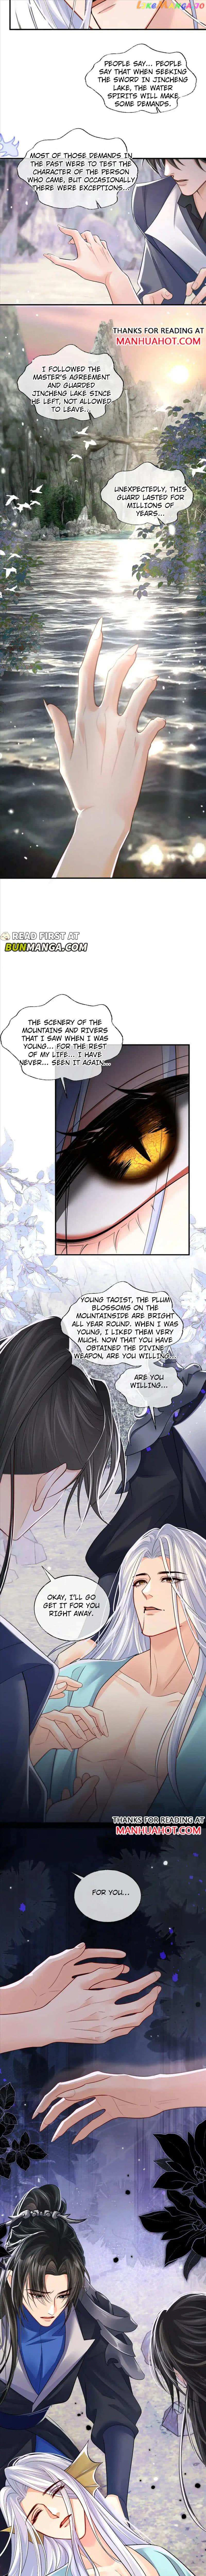 The Husky And His White Cat Shizun - Page 3